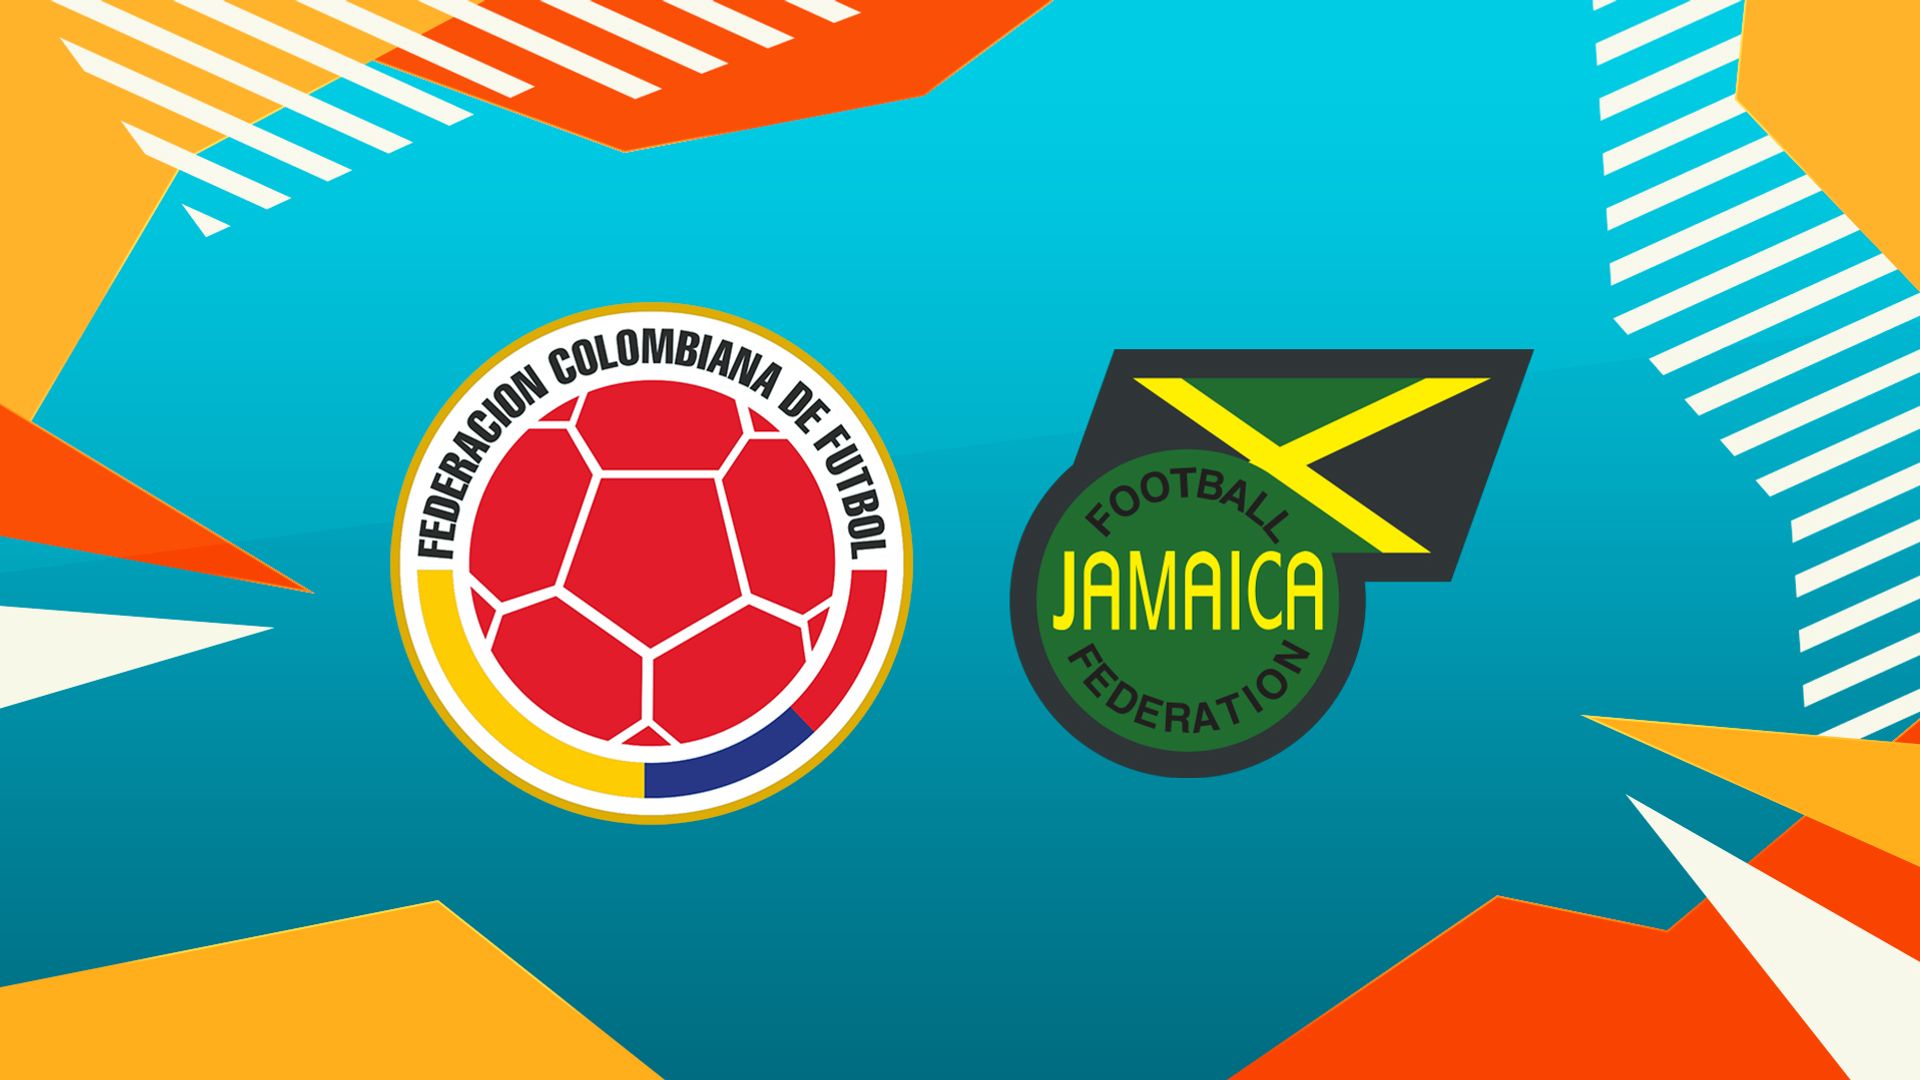 Women's World Cup: Colombia vs Jamaica LIVE!